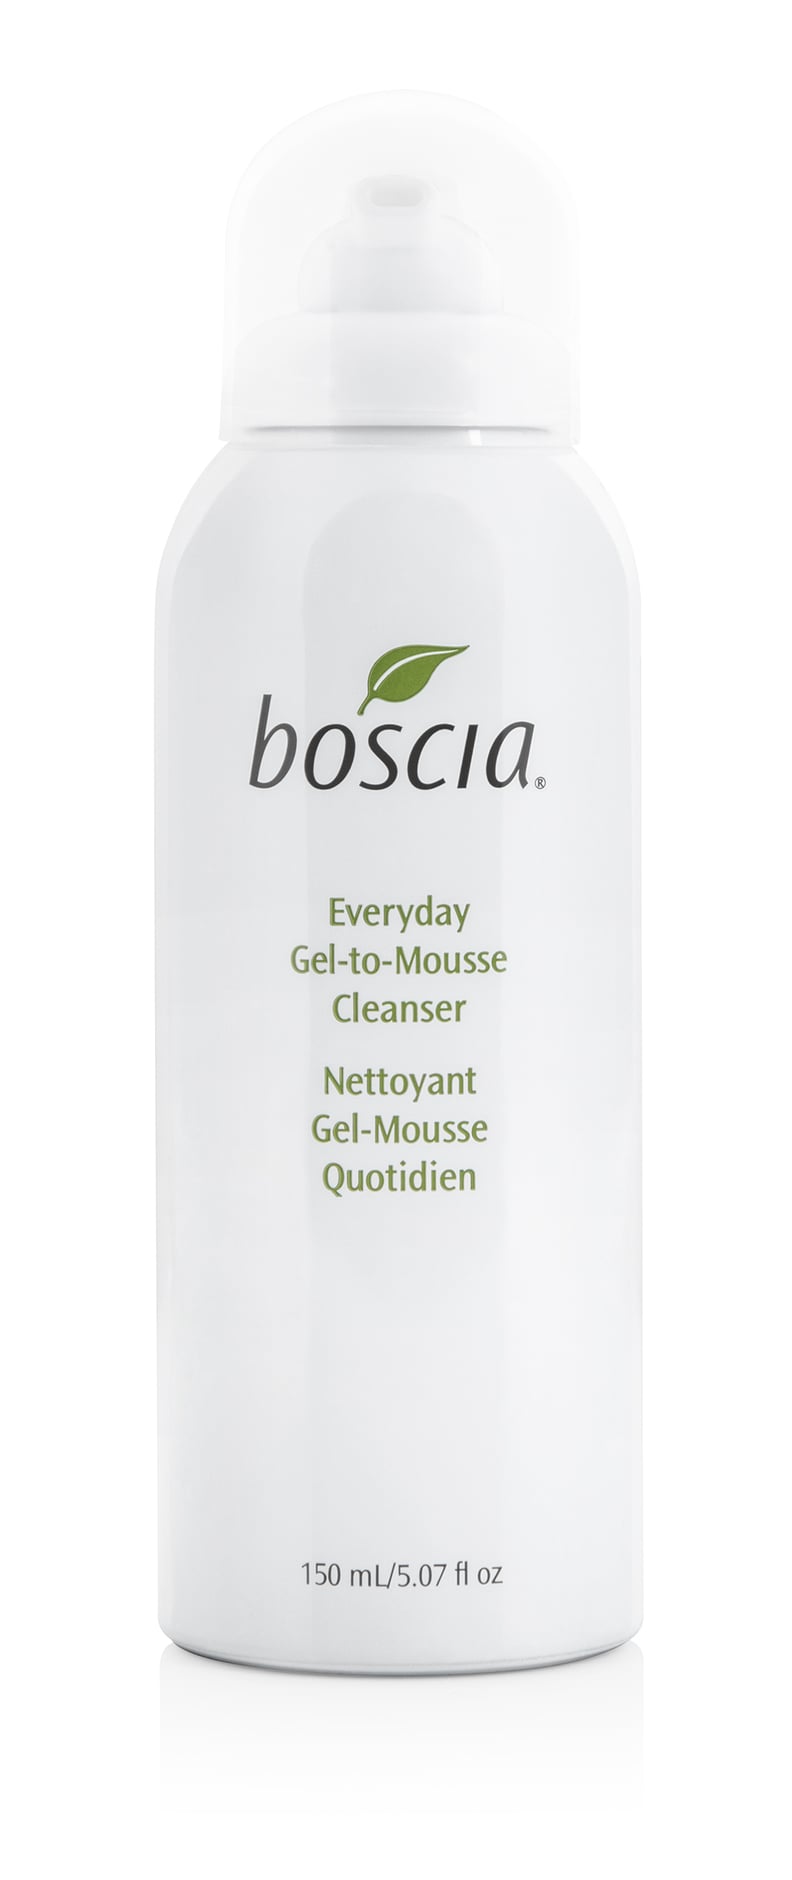 Boscia Everyday Gel-to-Mousse Cleanser